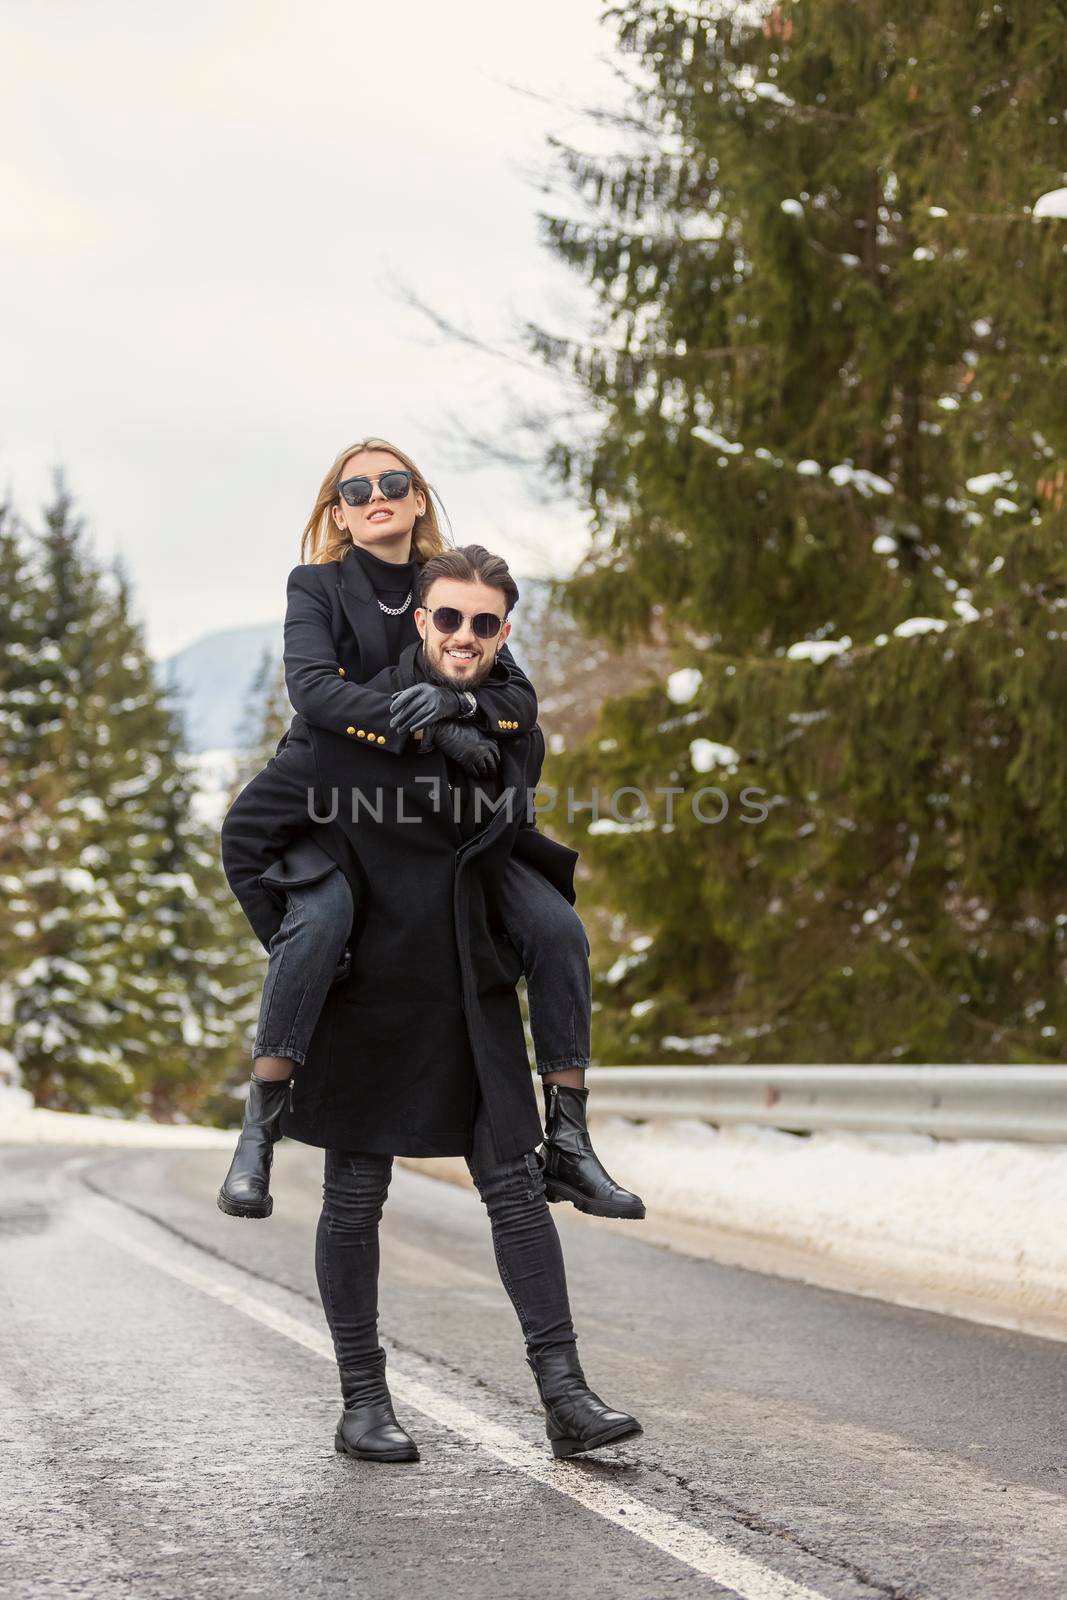 a guy with a girl on his back are walking on the road